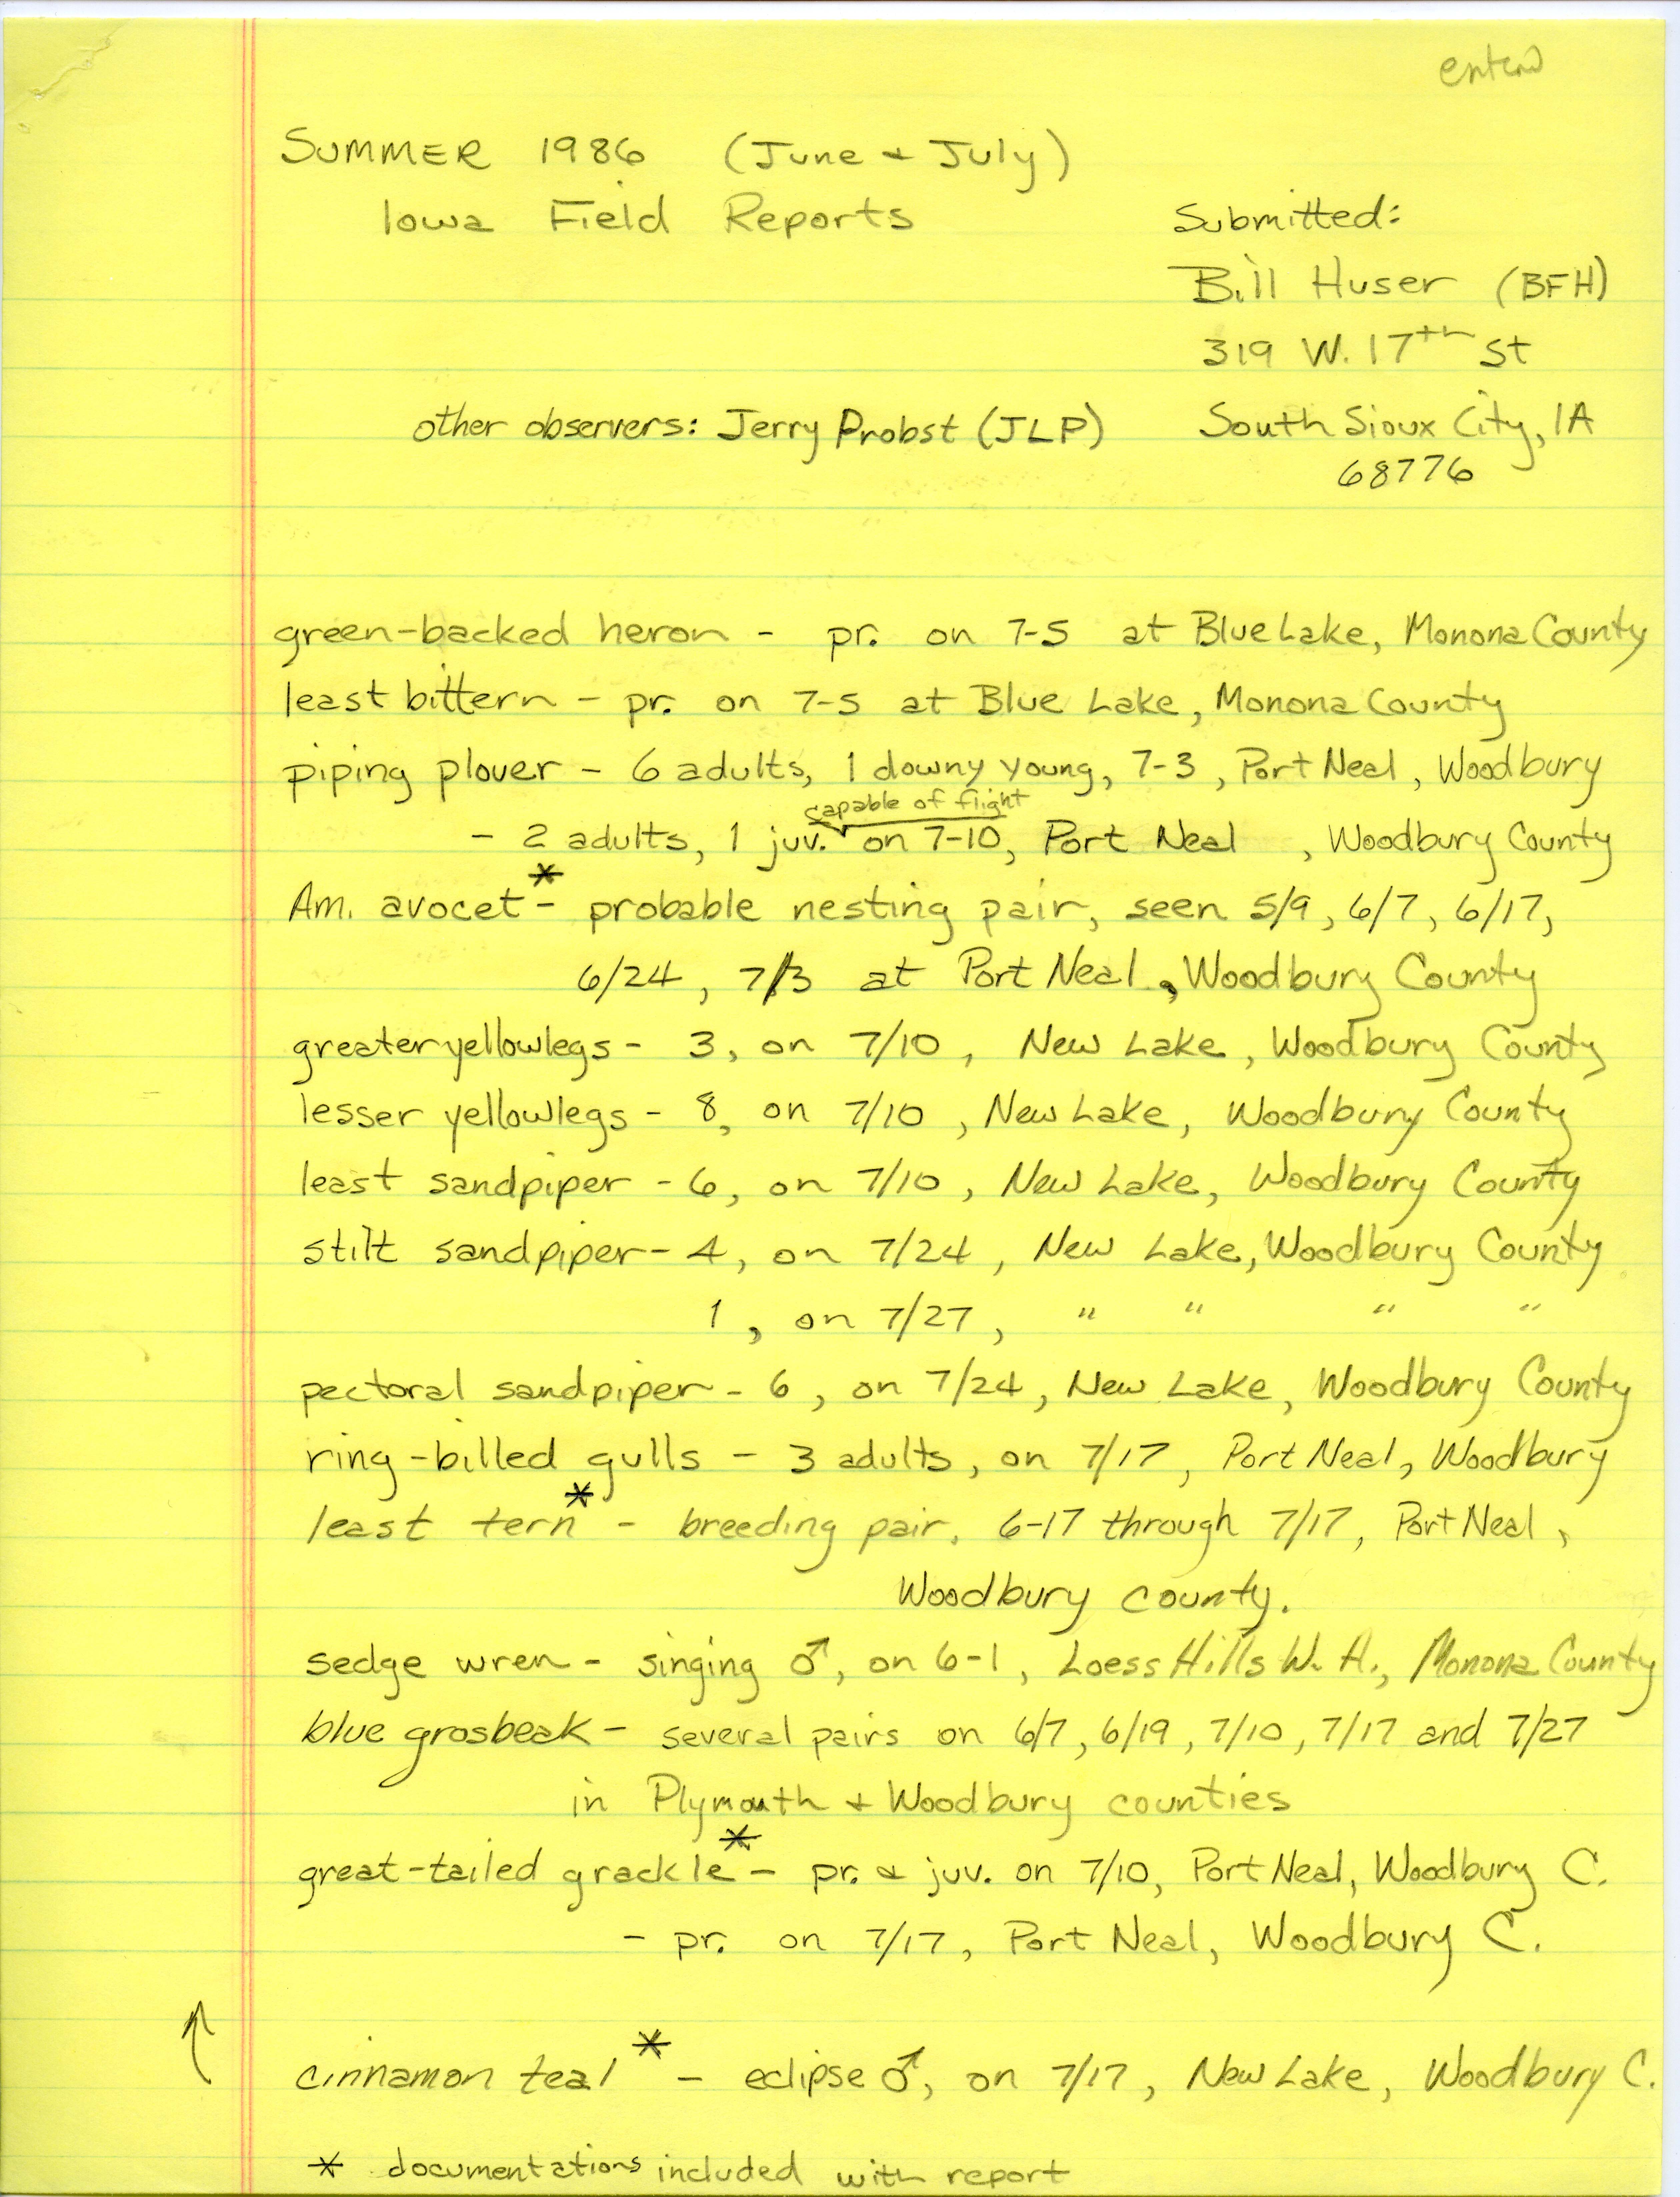 Field notes contributed by Bill F. Huser, summer 1986